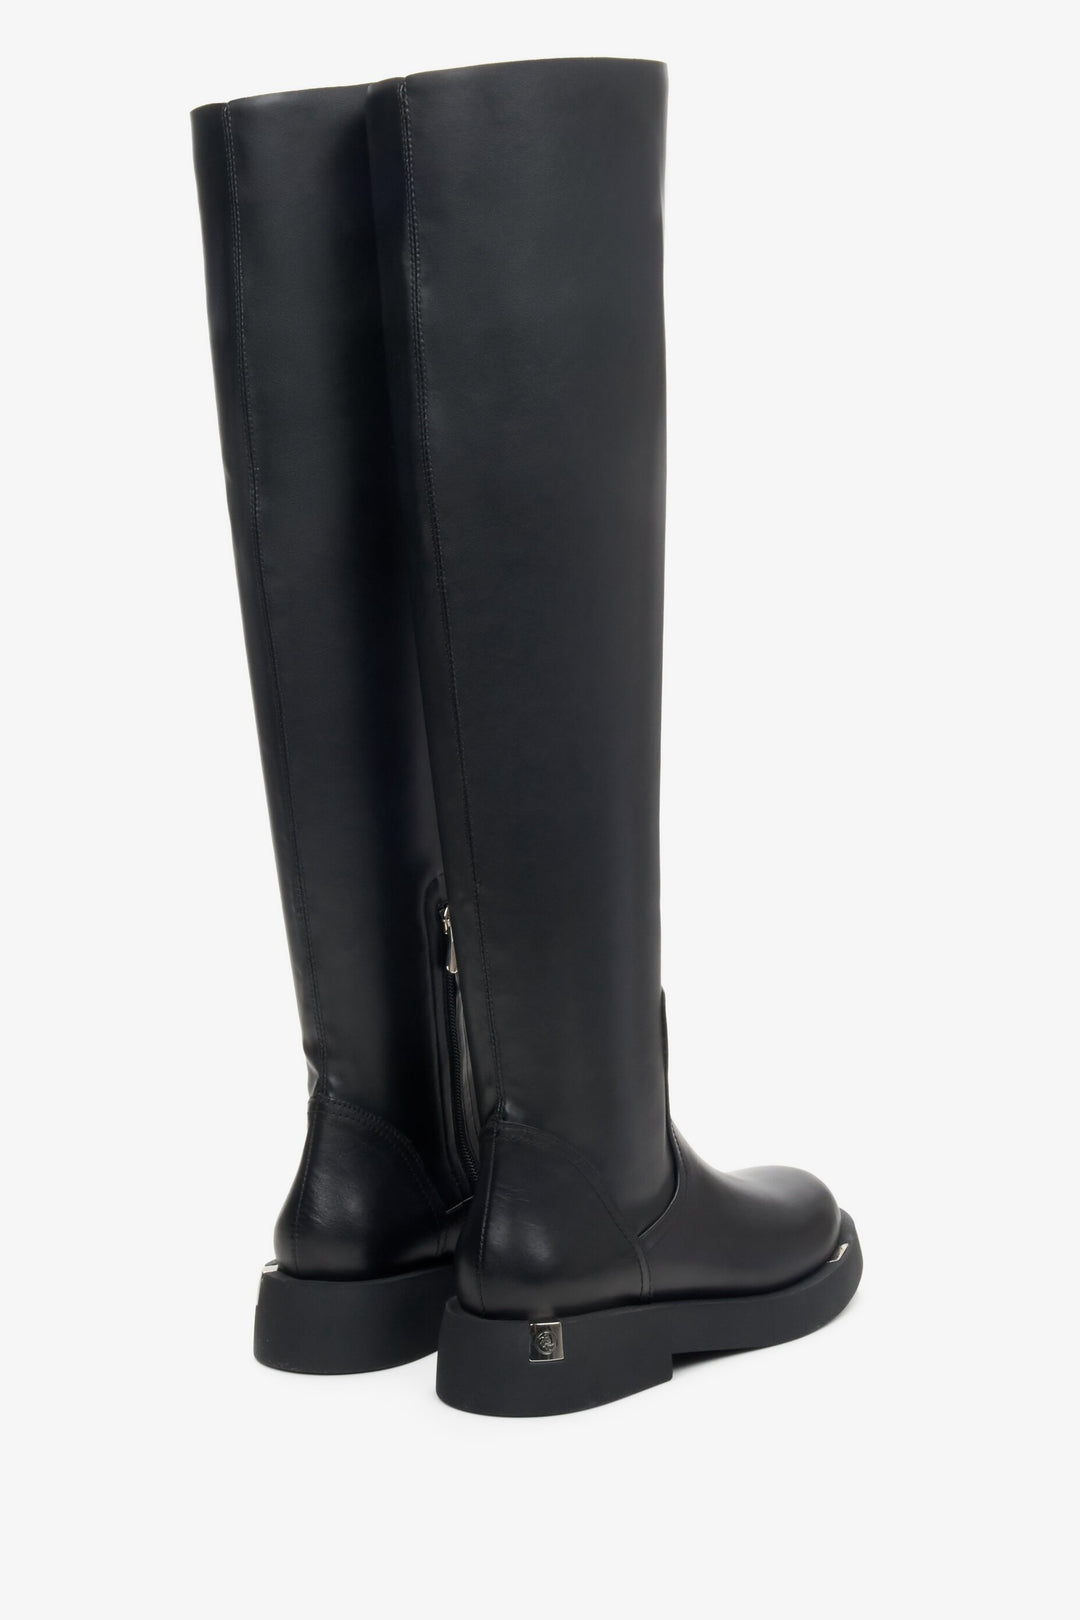 Women's high-top boots in black leather - a close-up o the shoes' back.